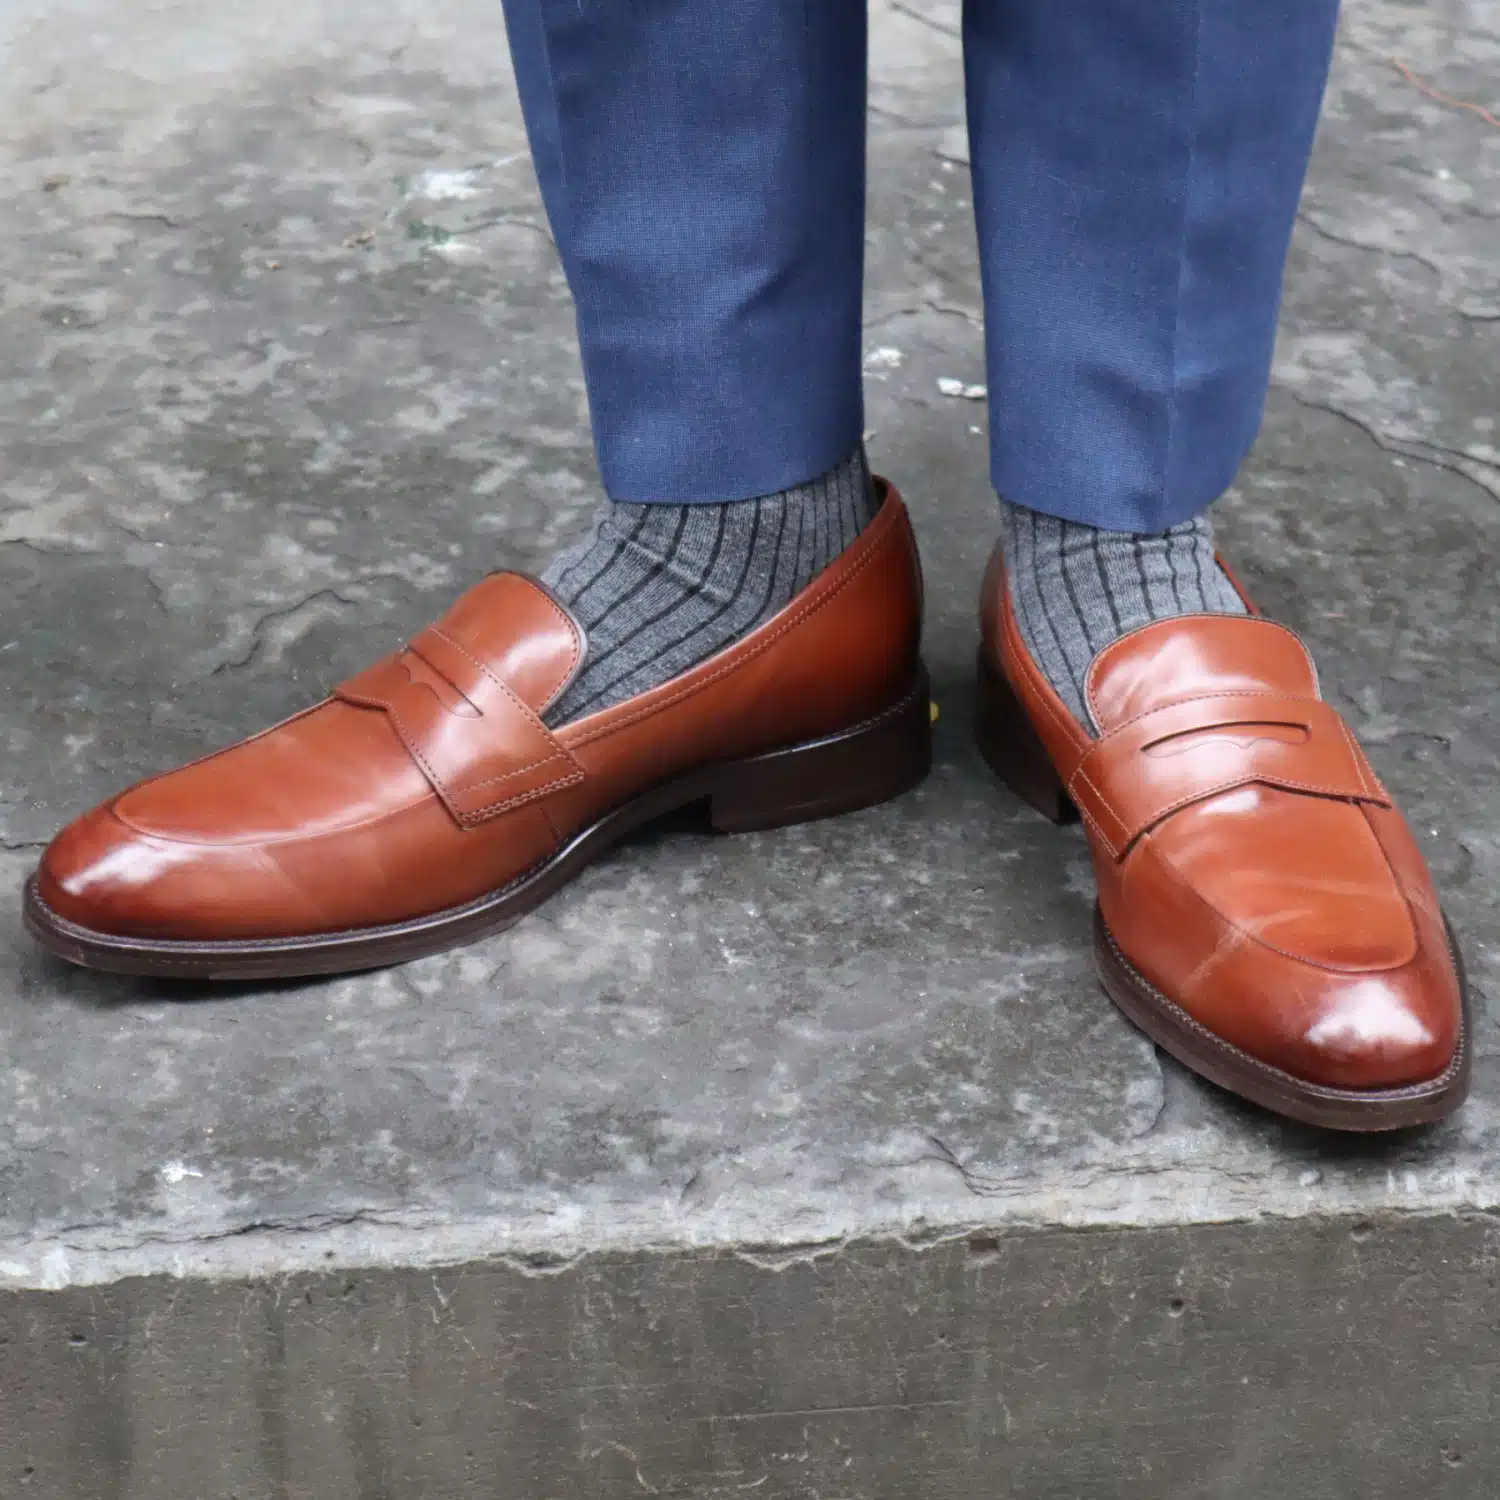 Johnston & Murphy Shoes Review - Must Read This Before Buying